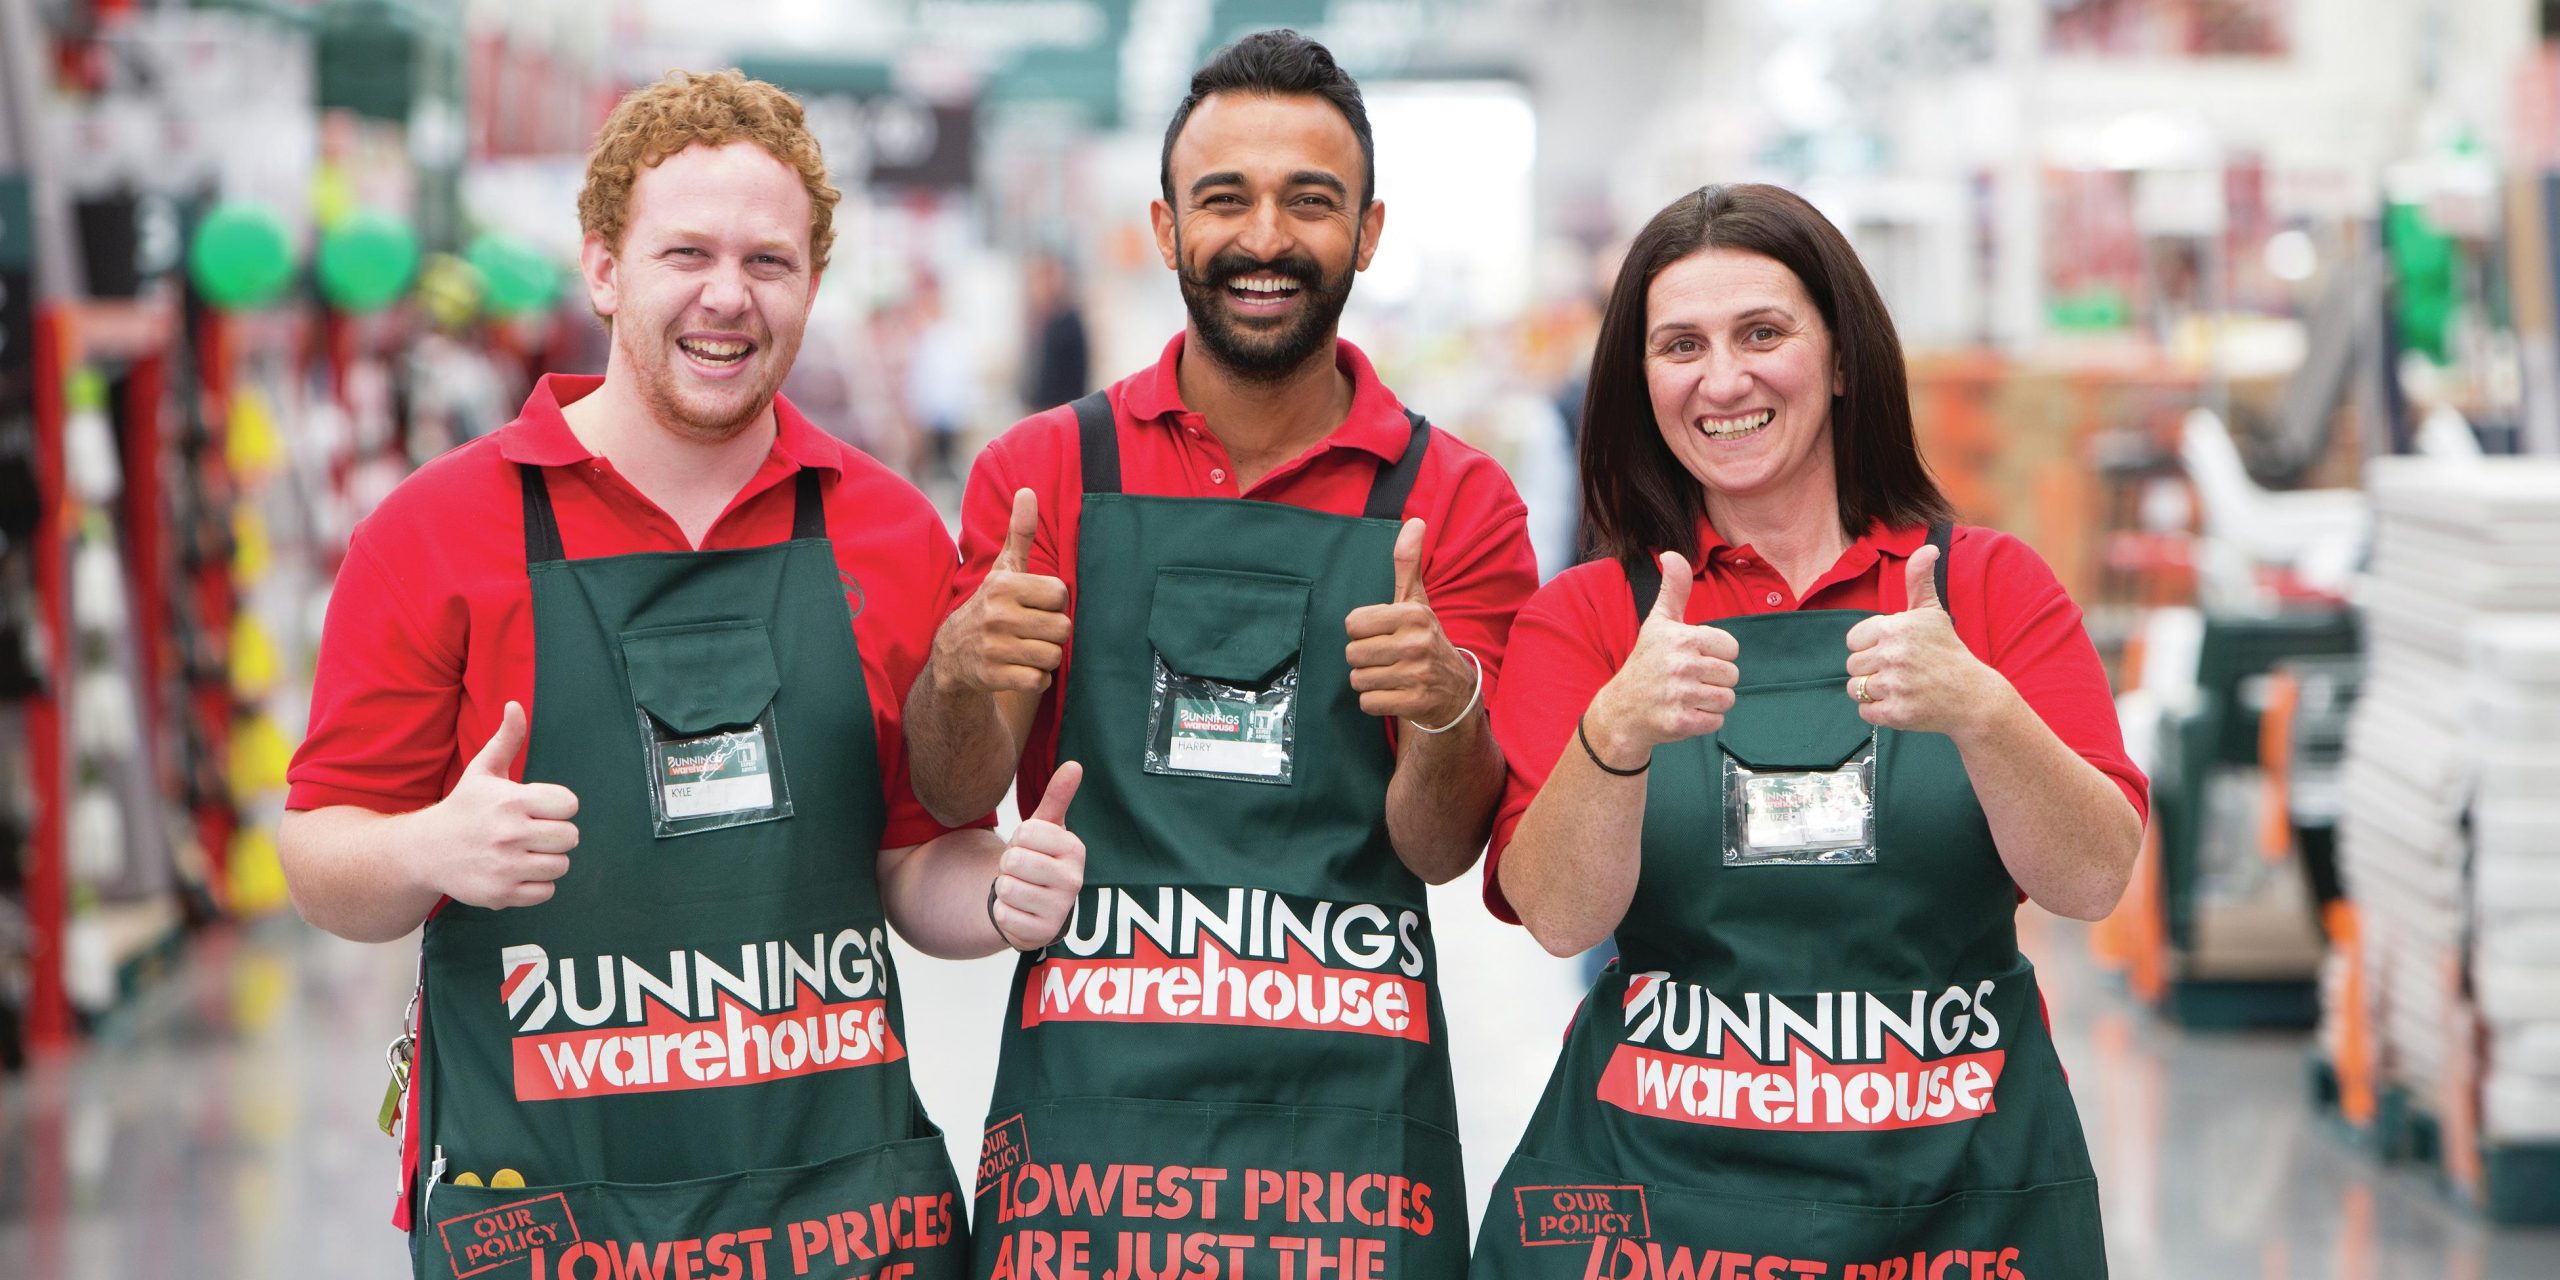 Bunnings Jobs: Find Your Career in Retail Now!